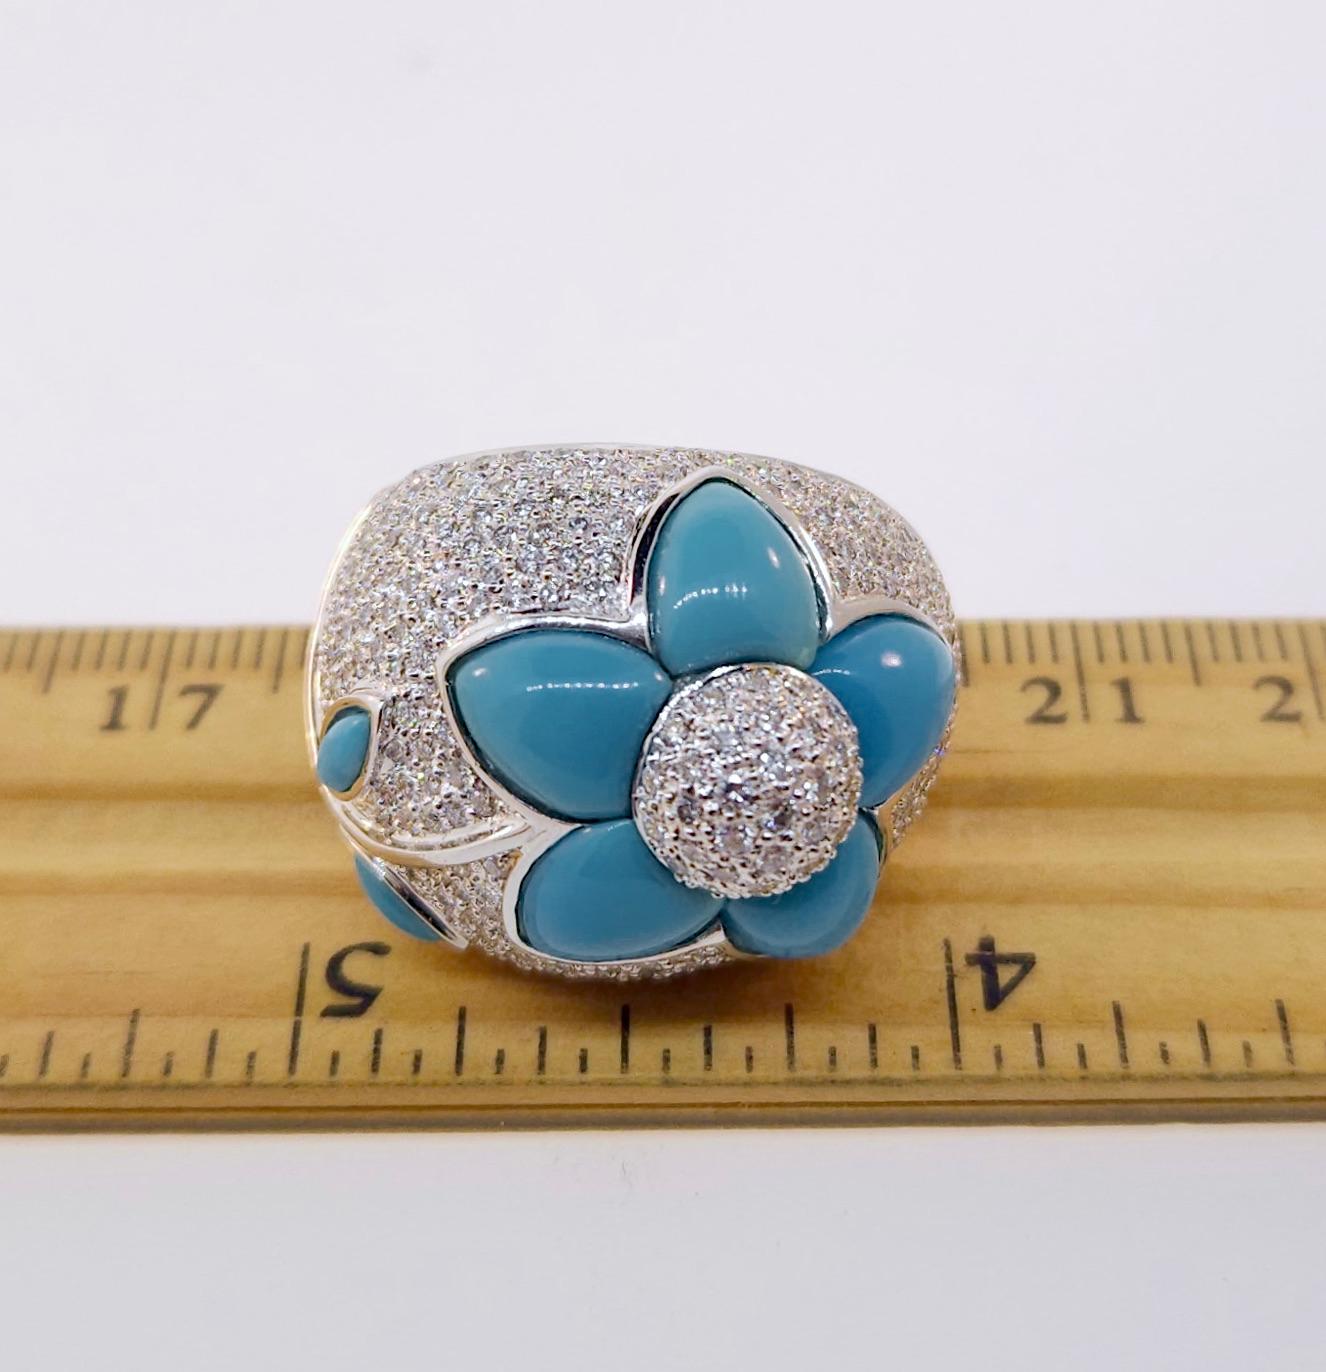 Large 18k White Gold Diamond & Turquoise Earrings  In Excellent Condition For Sale In New York, NY